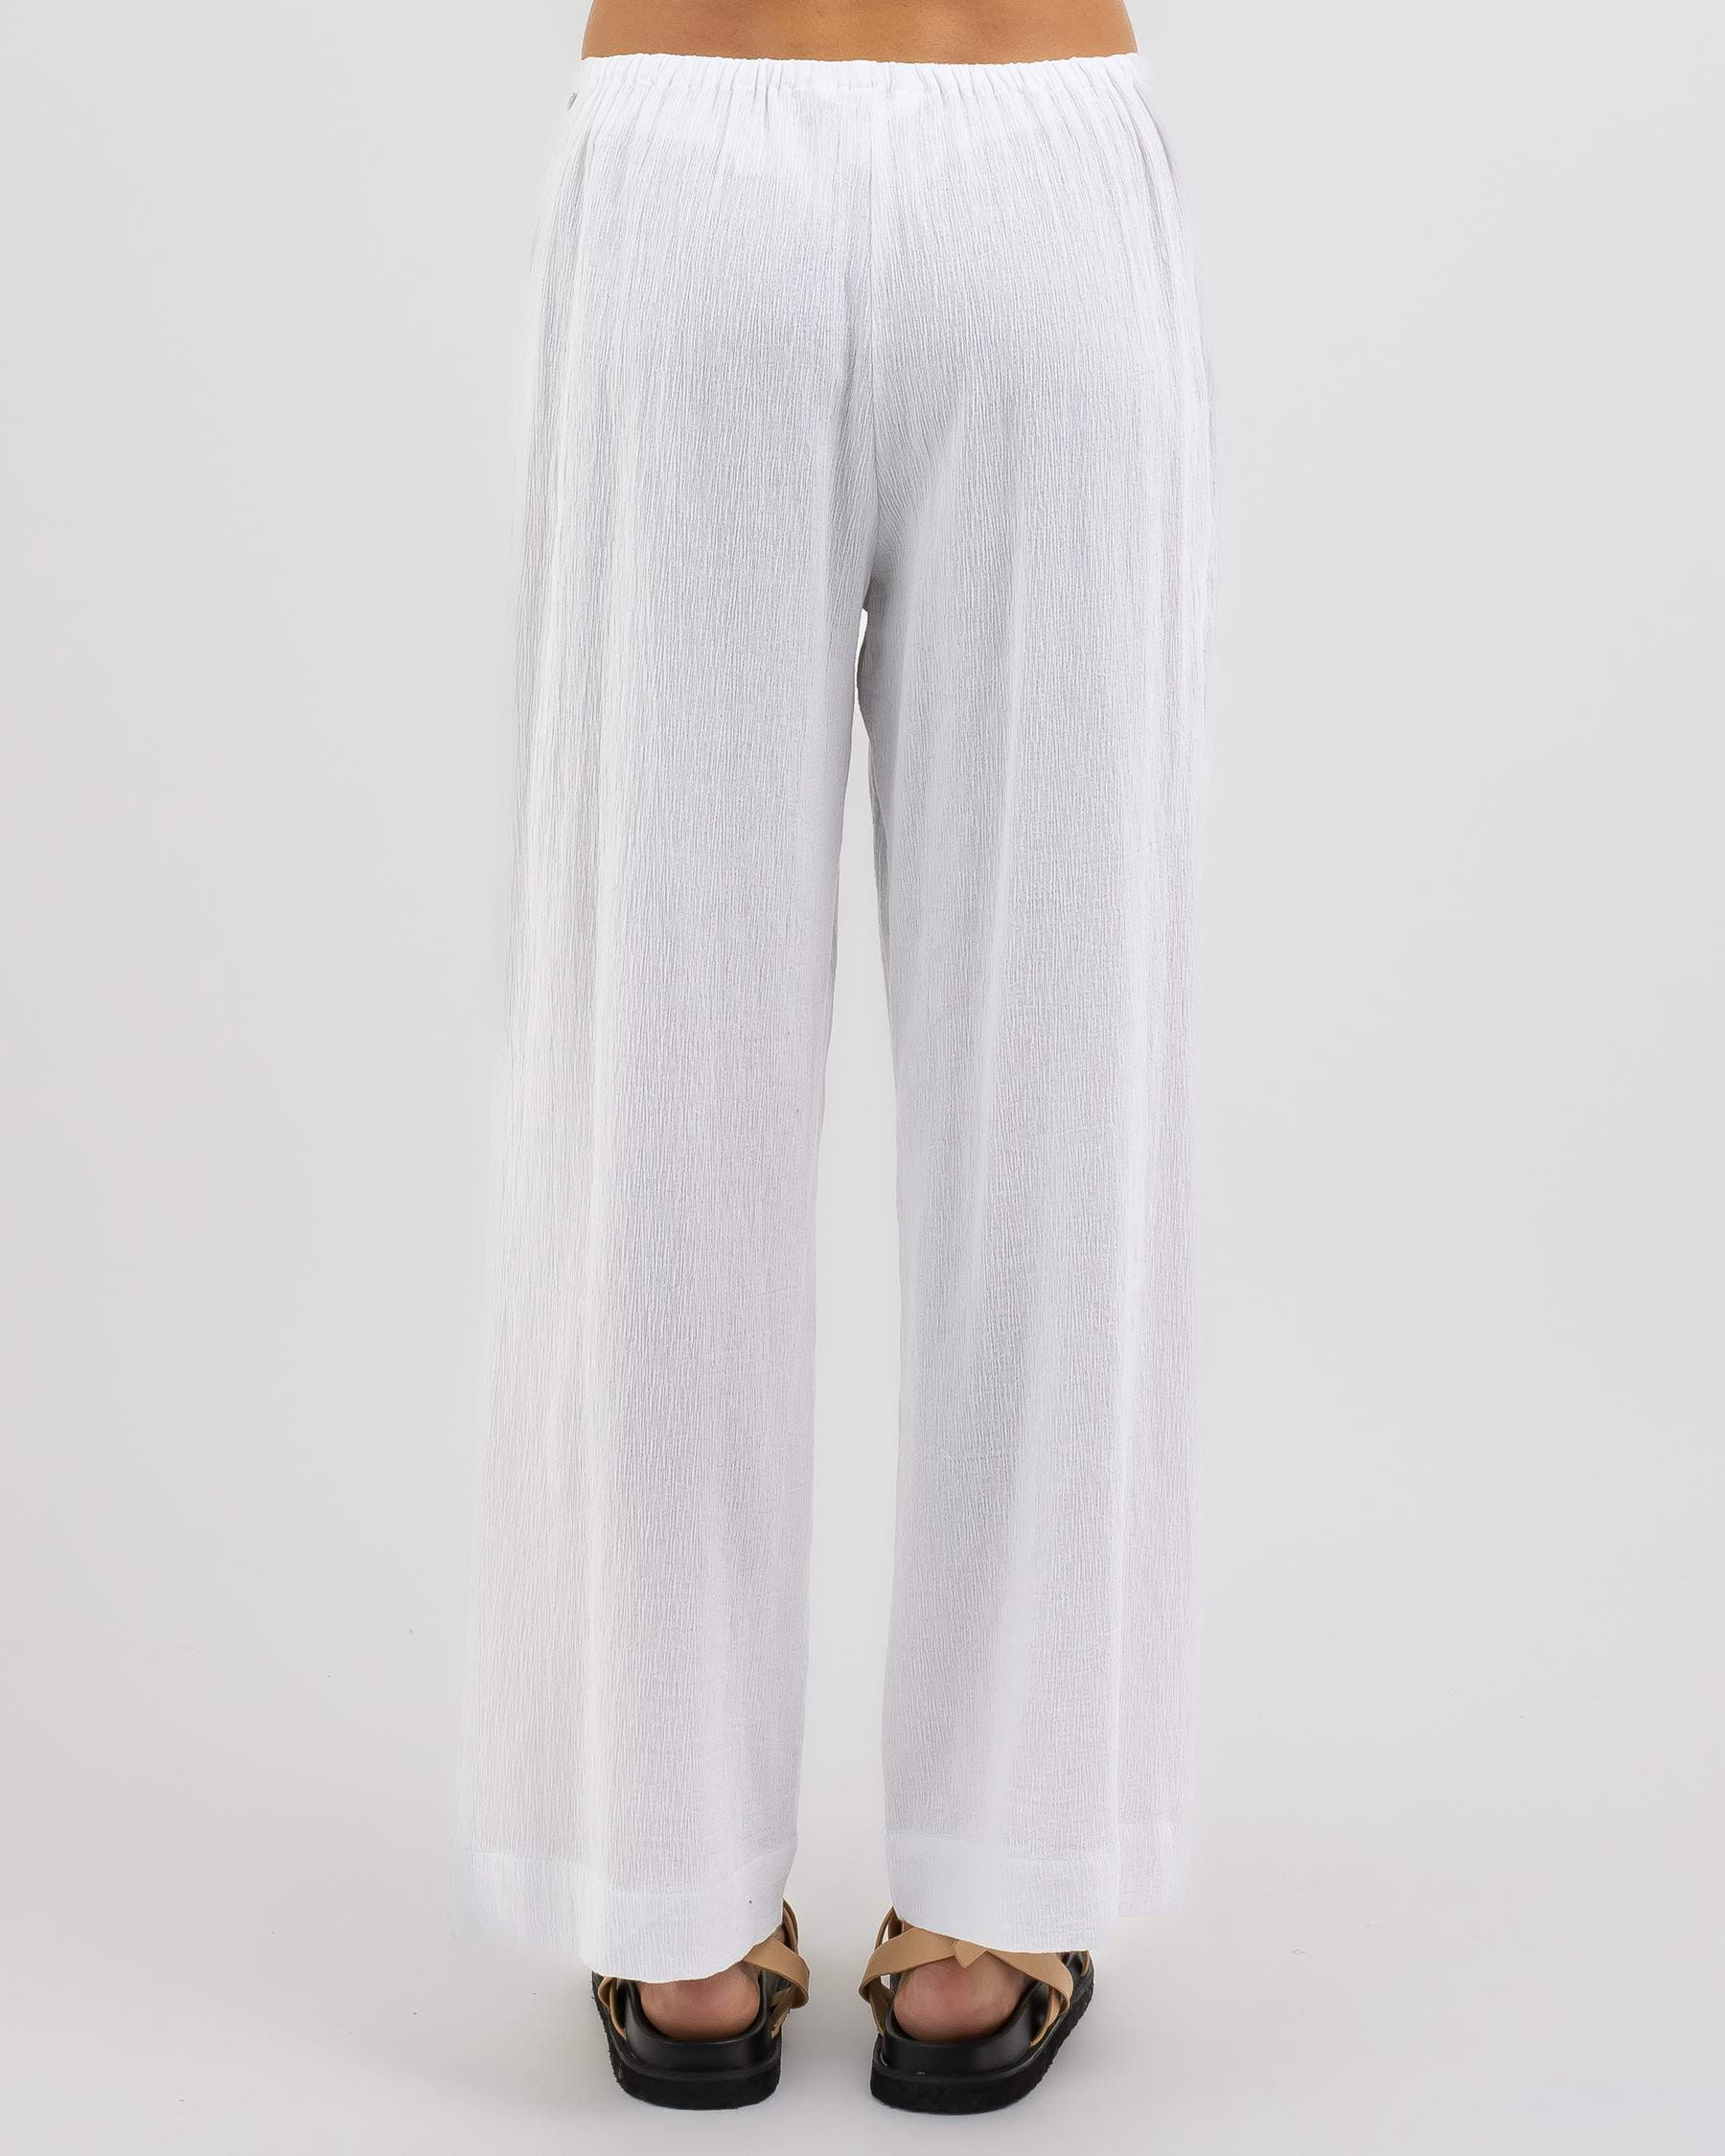 Shop Rusty Vahala Pants In White - Fast Shipping & Easy Returns - City ...